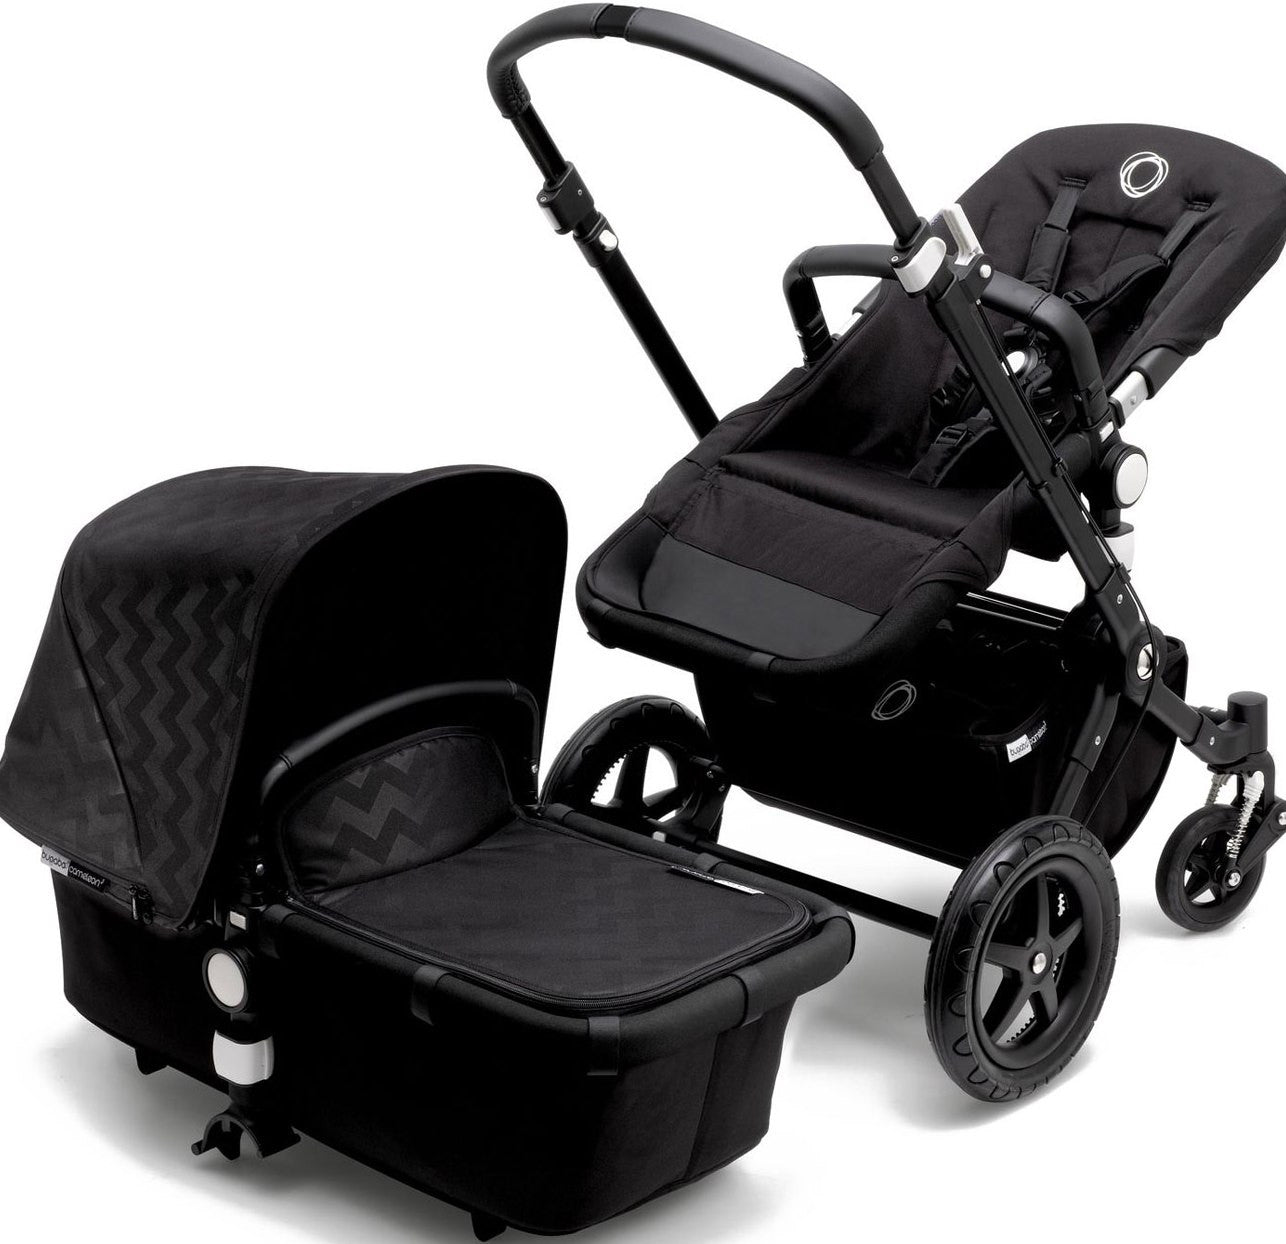 Full Feature Strollers